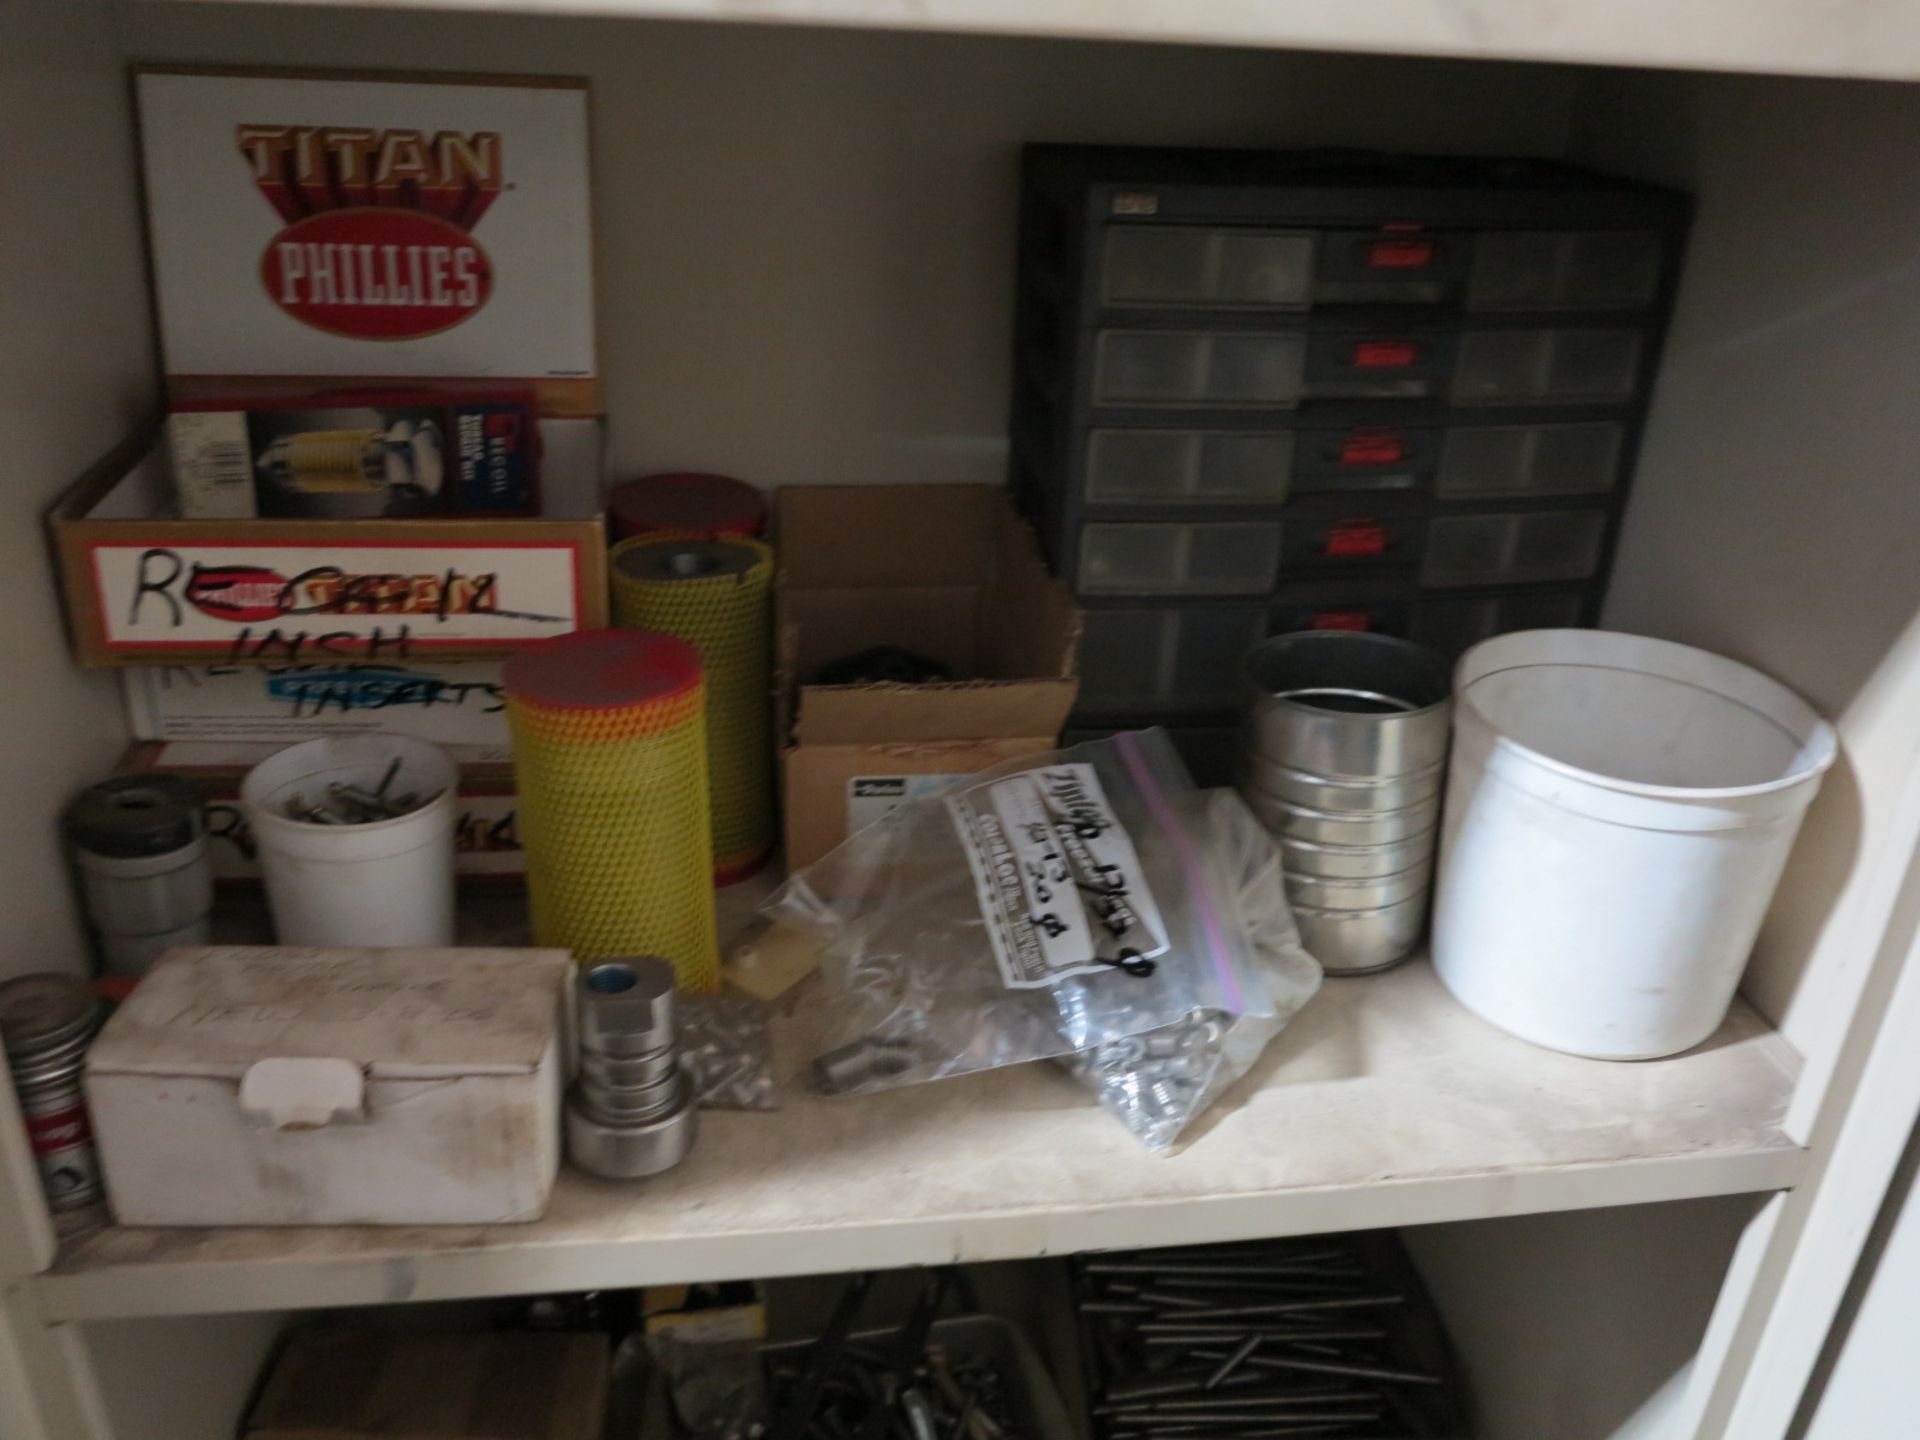 2-DOOR CABINET W/ CONTENTS OF MILLING CUTTERS AND MISC HARDWARE - Image 3 of 5